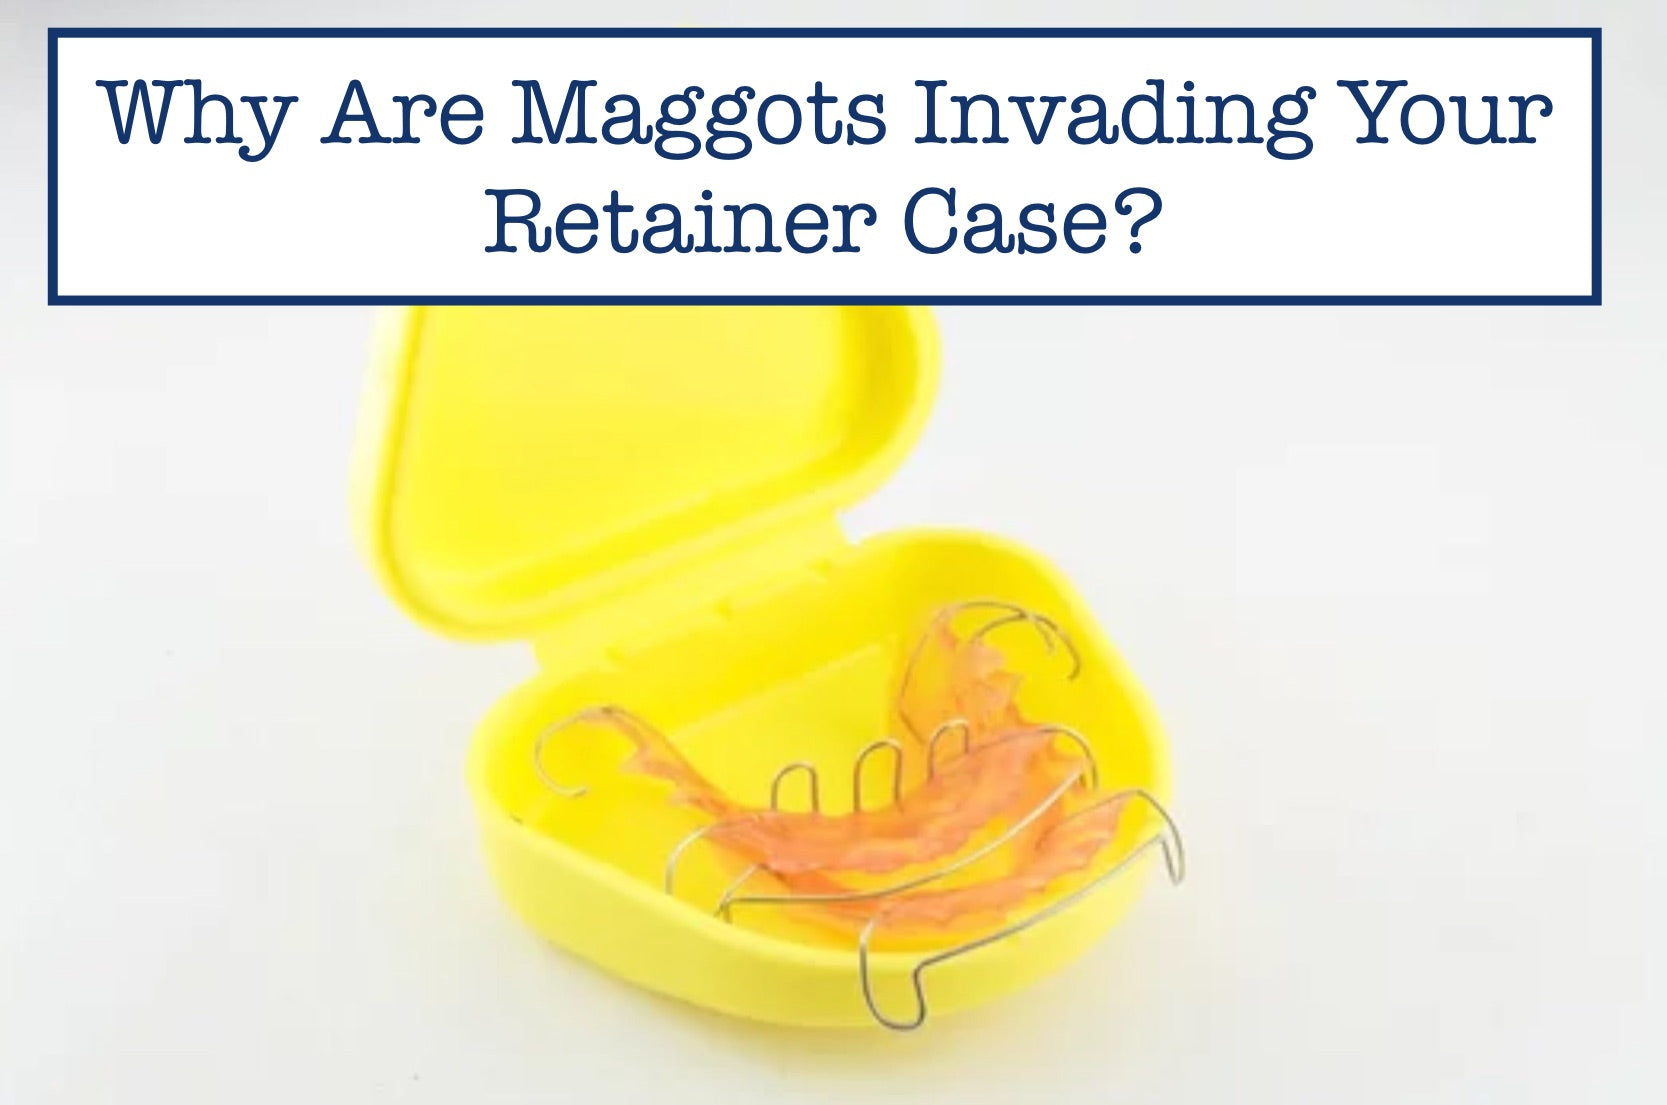 Why Are Maggots Invading Your Retainer Case?